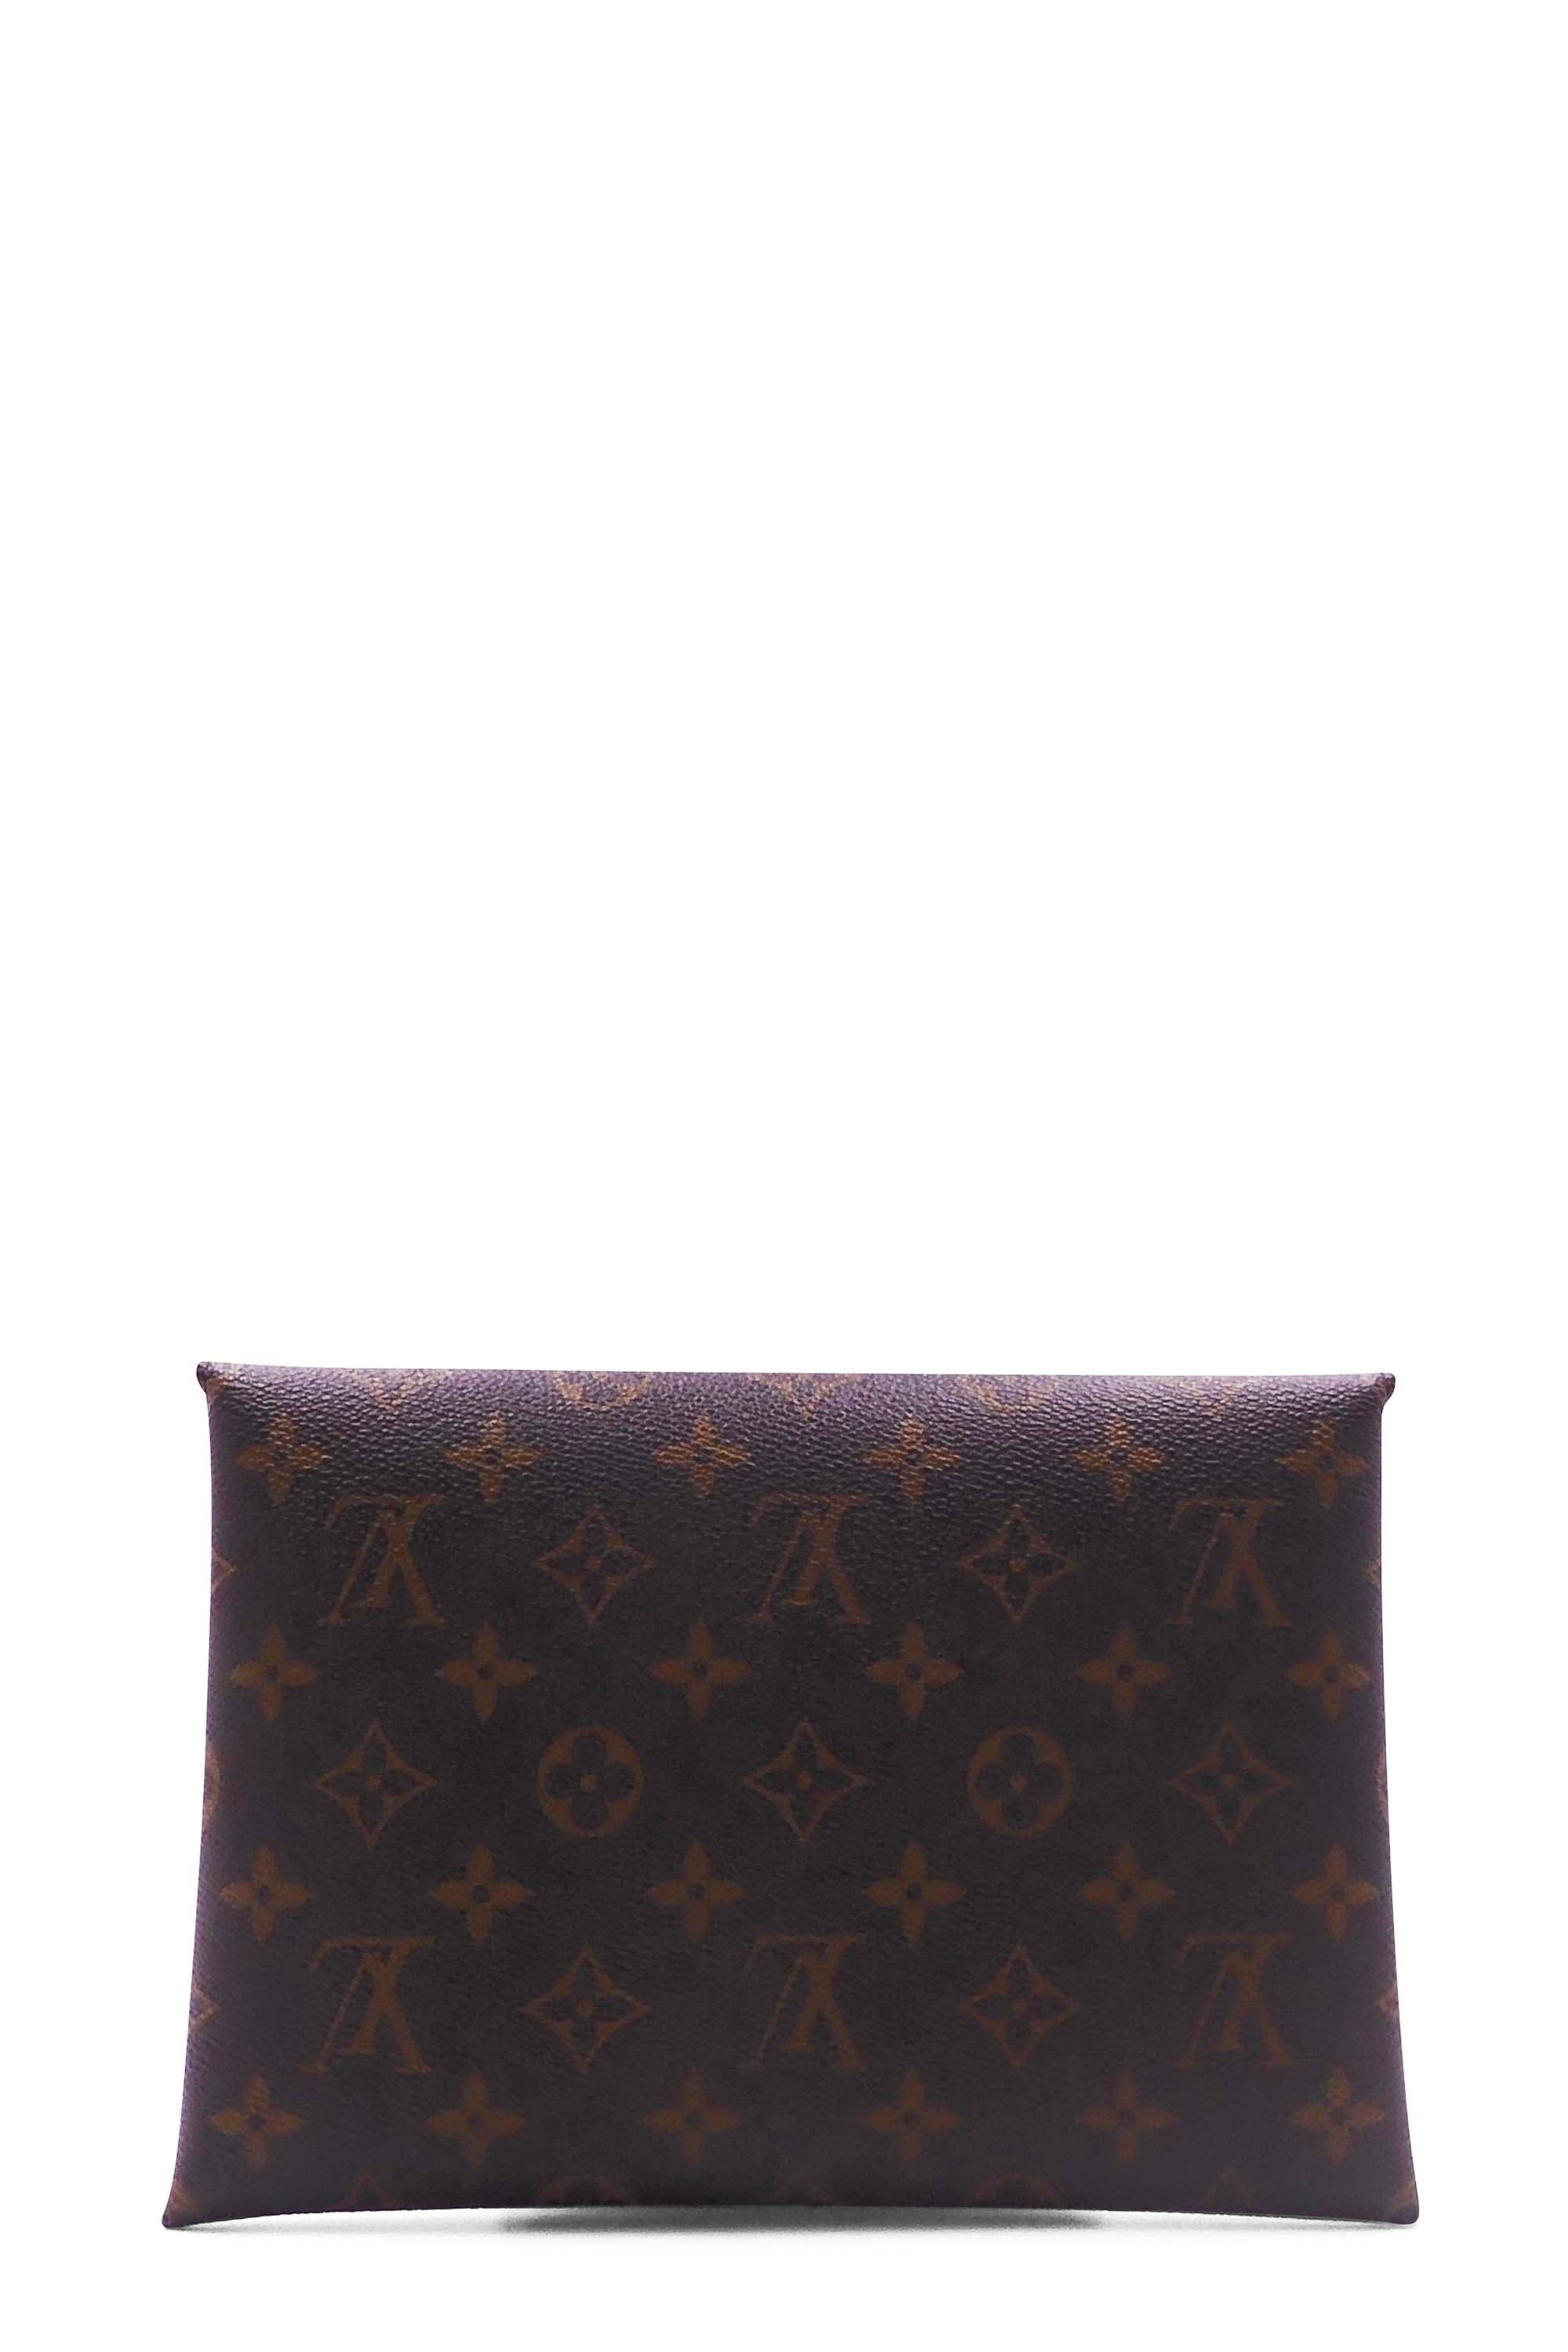 Kirigami leather clutch bag Louis Vuitton Brown in Leather - 34926498